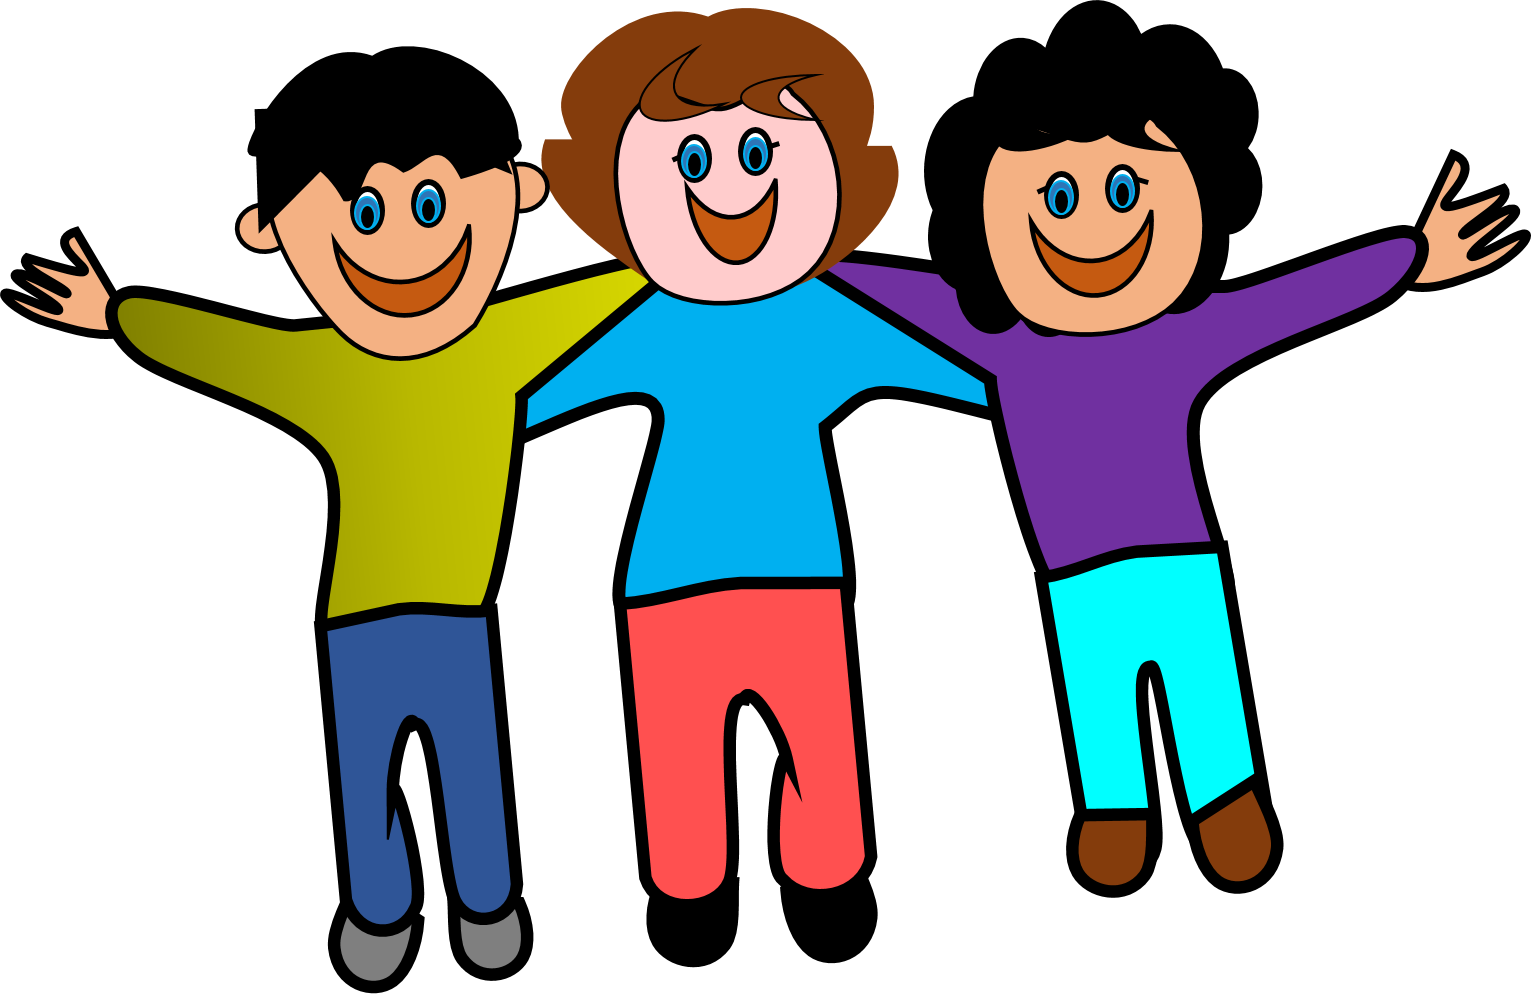 Enjoyment With Friends Clipart - Enjoyment With Friends, Transparent background PNG HD thumbnail